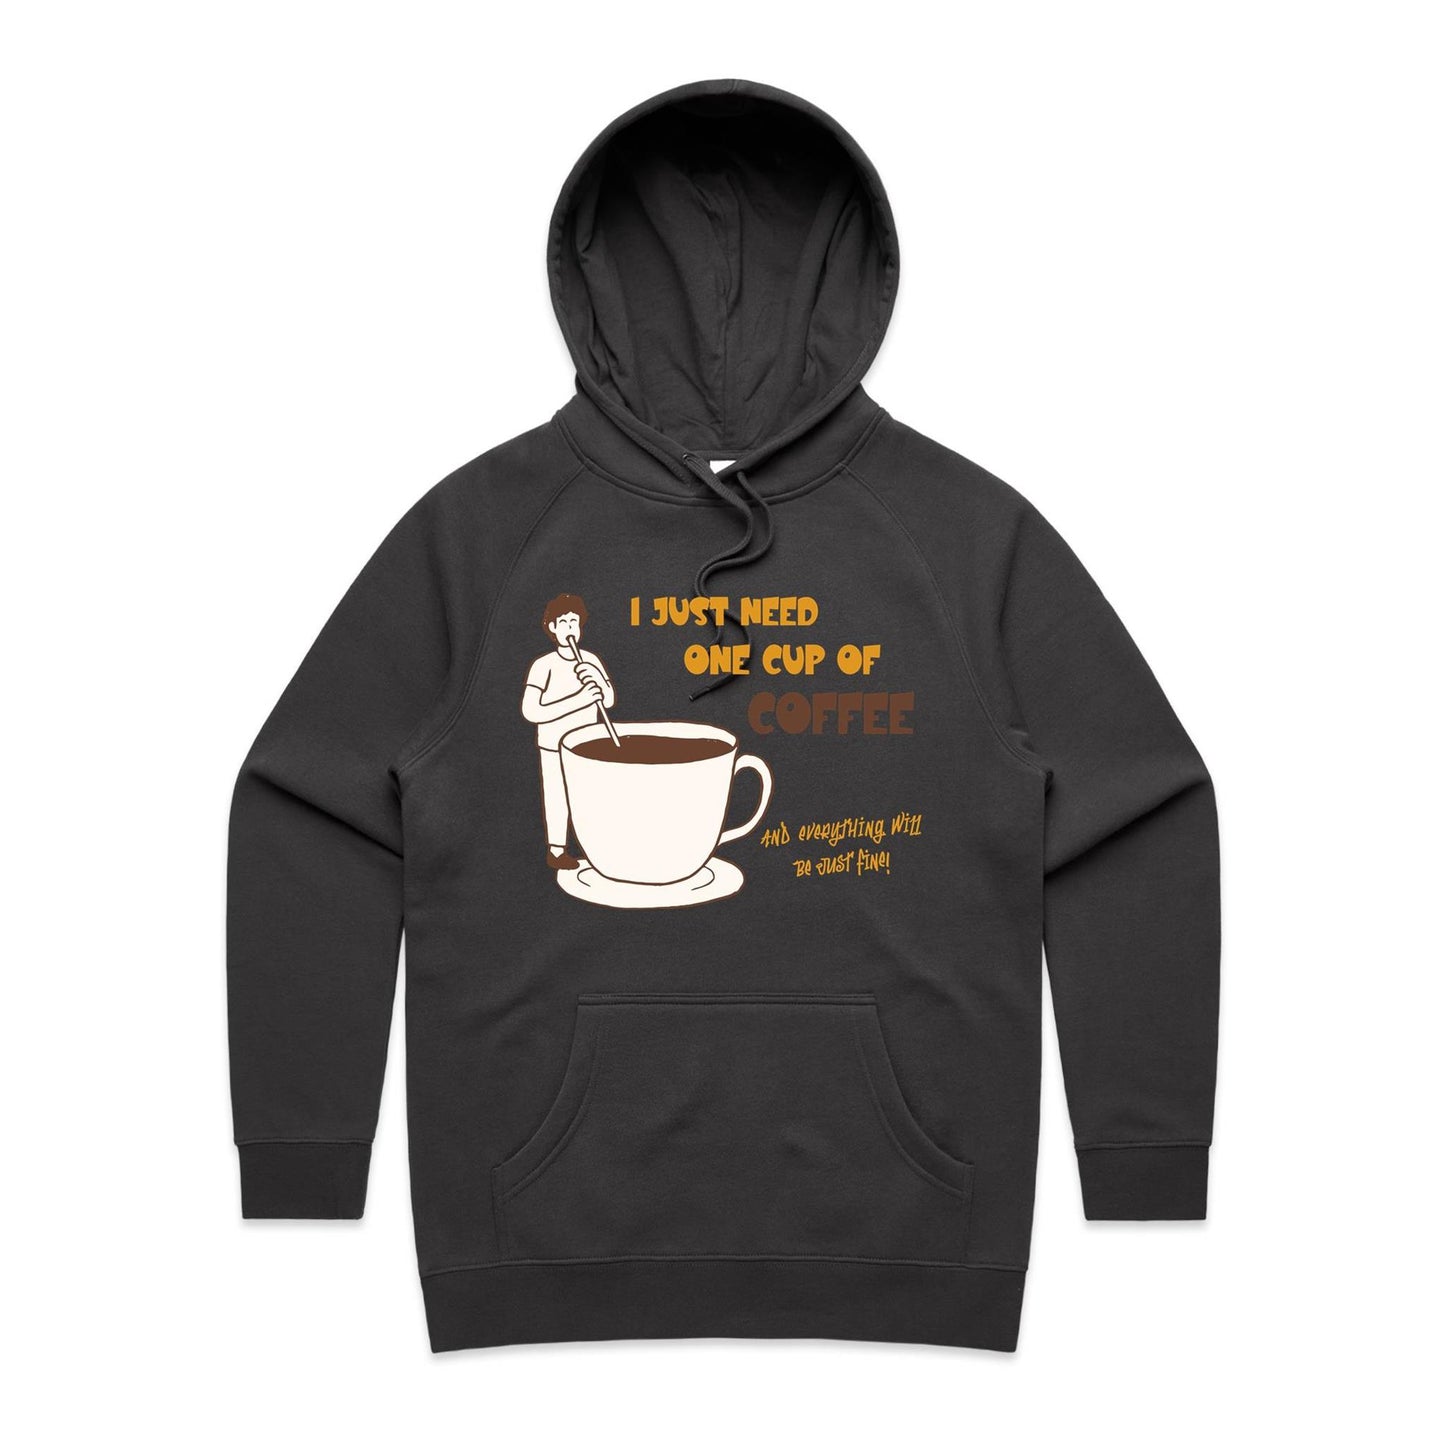 I Just Need One Cup Of Coffee And Everything Will Be Just Fine - Women's Supply Hood Coal Womens Supply Hoodie Coffee